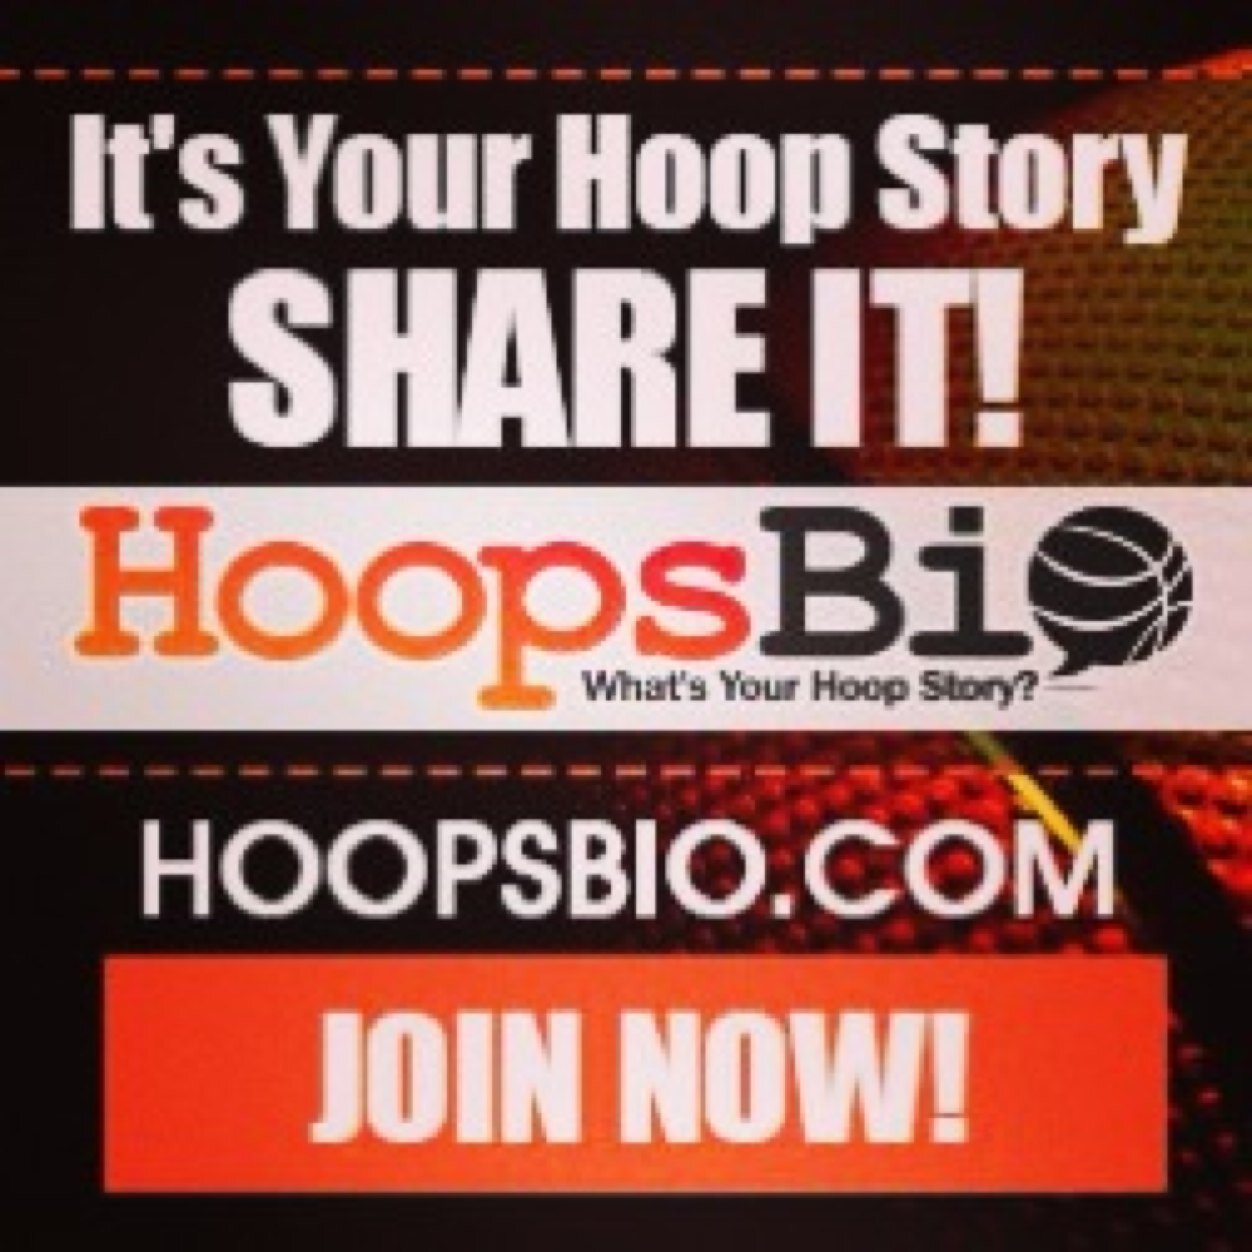 Share your hoop story, highlights, workouts, and inspiration with us at http://t.co/qLlQOg7EYW